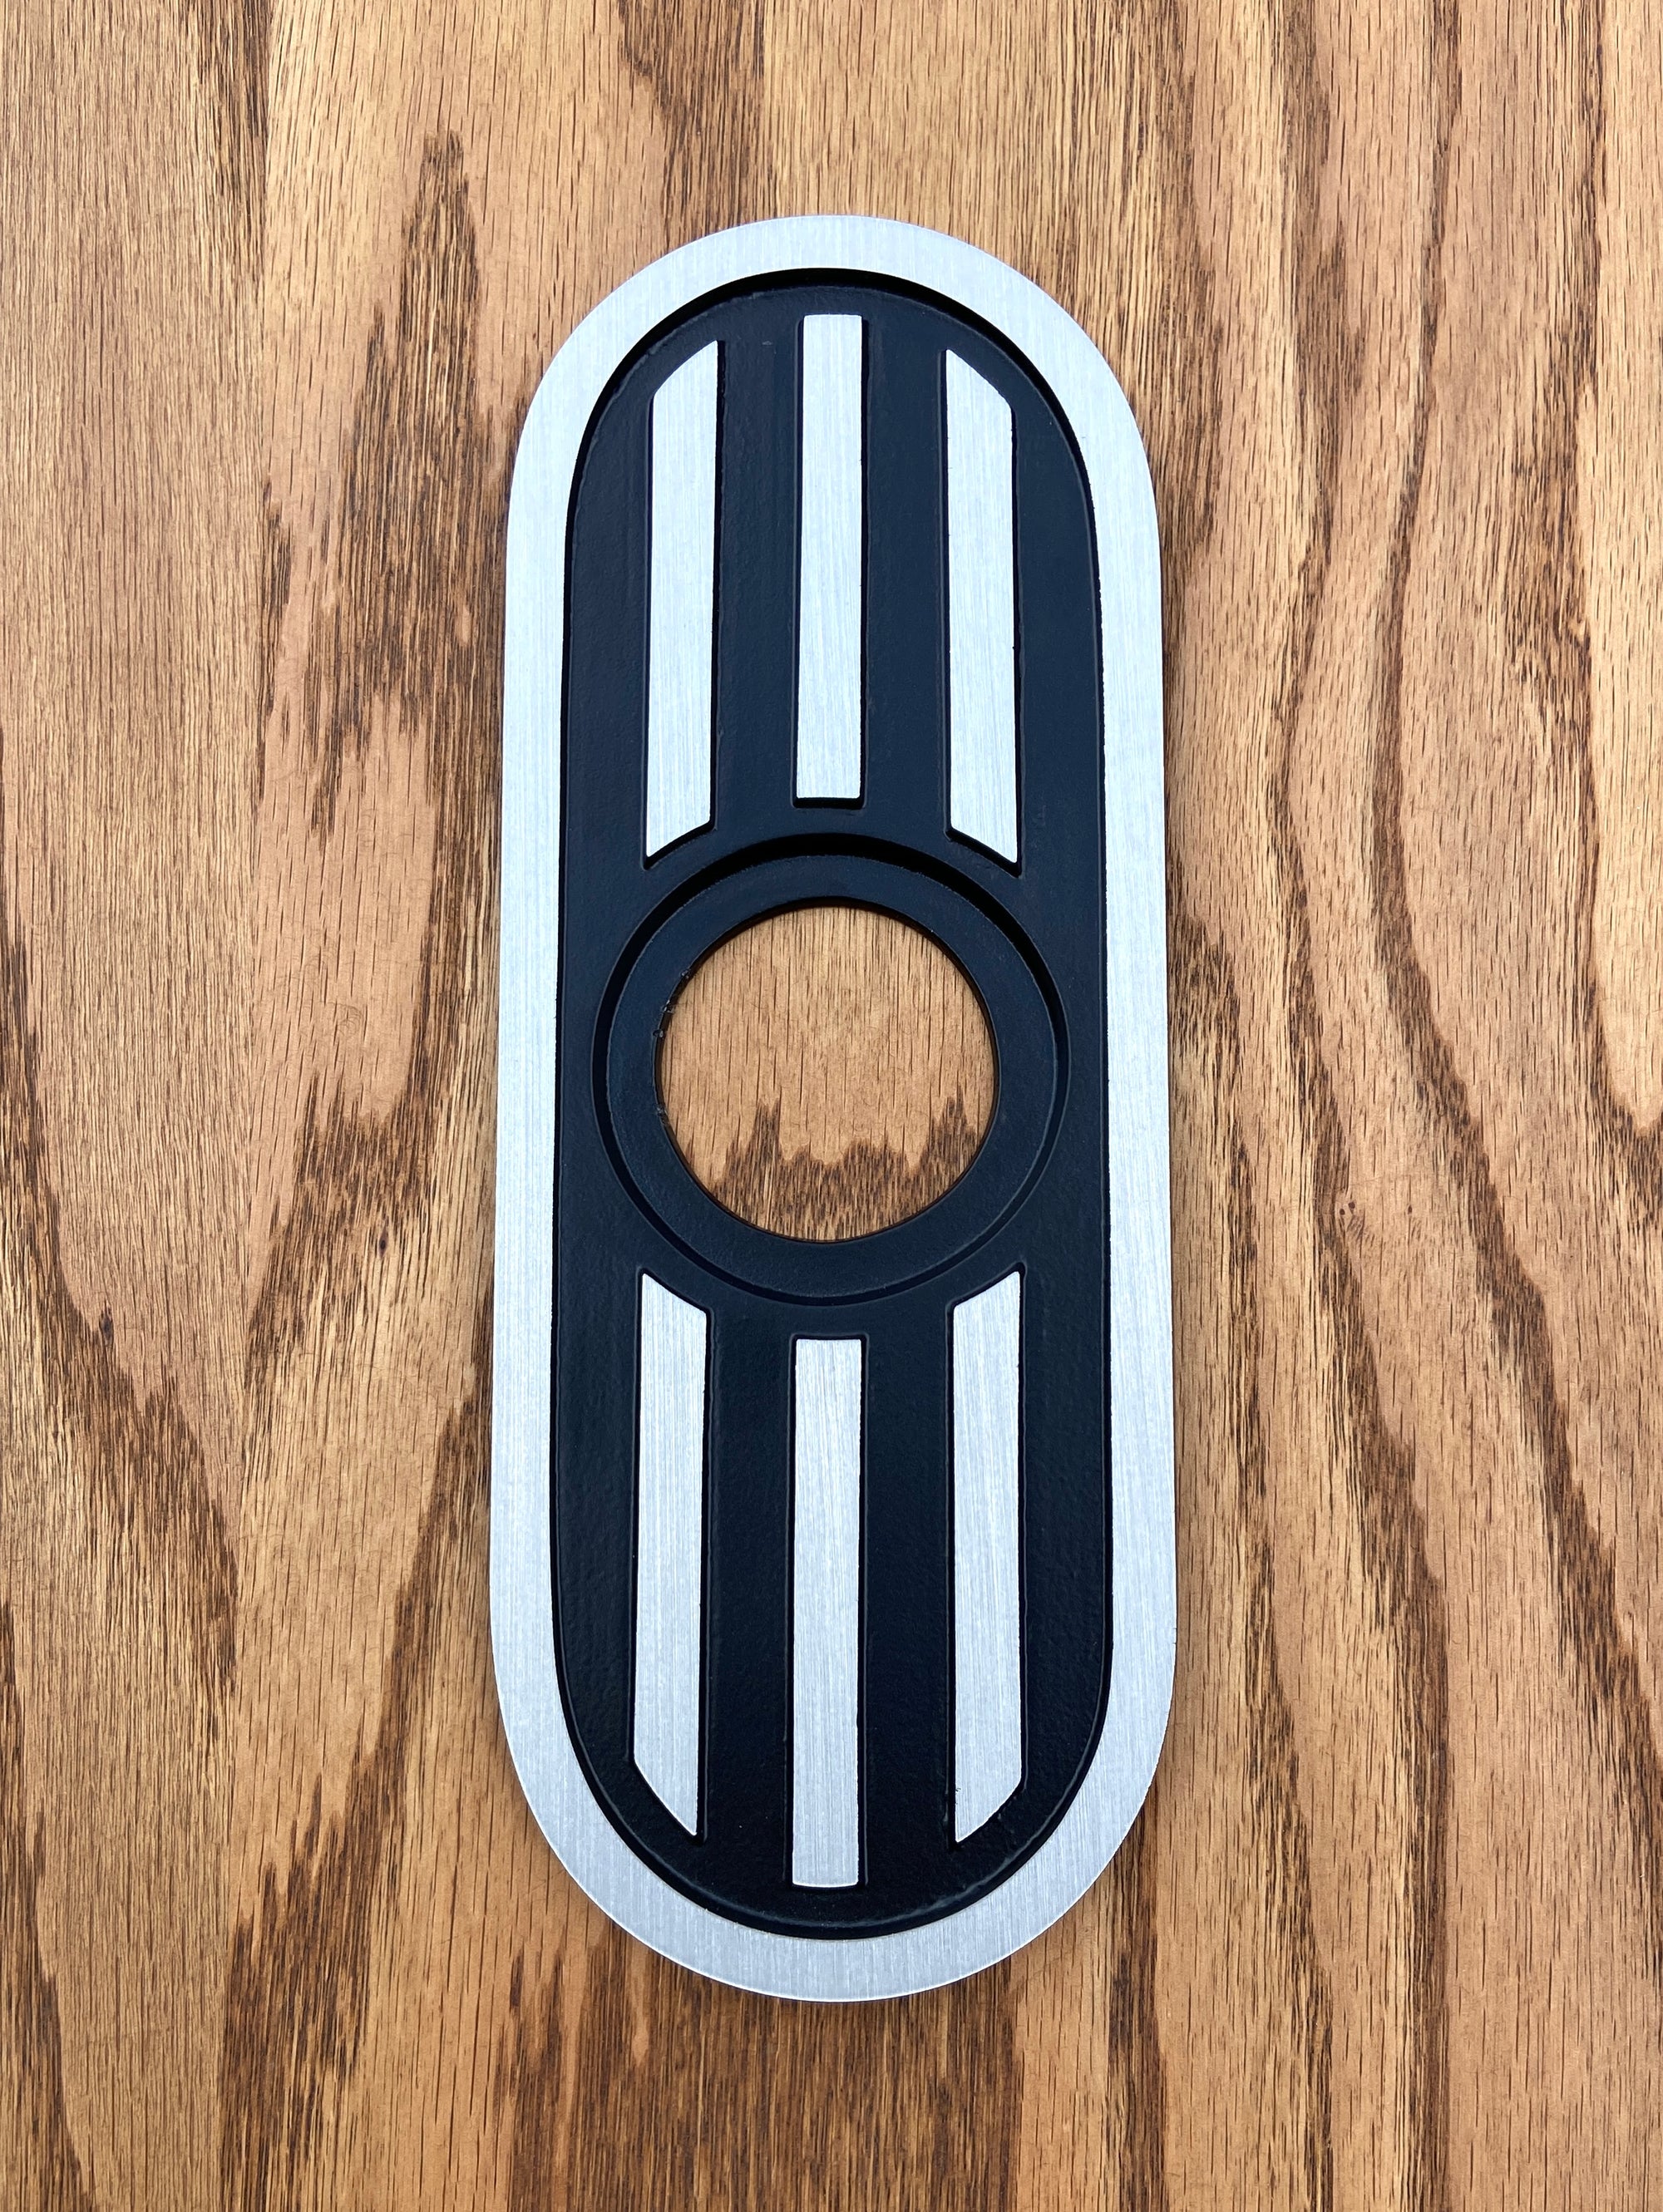 A cast aluminum door knob escutcheon. It is a long vertical oval shape, with three vertical stripes in the middle. There is a hole in the very center where the doorknob goes. The outer edge  and the three vertical stripes are raised from the middle sunken area to give contrast.